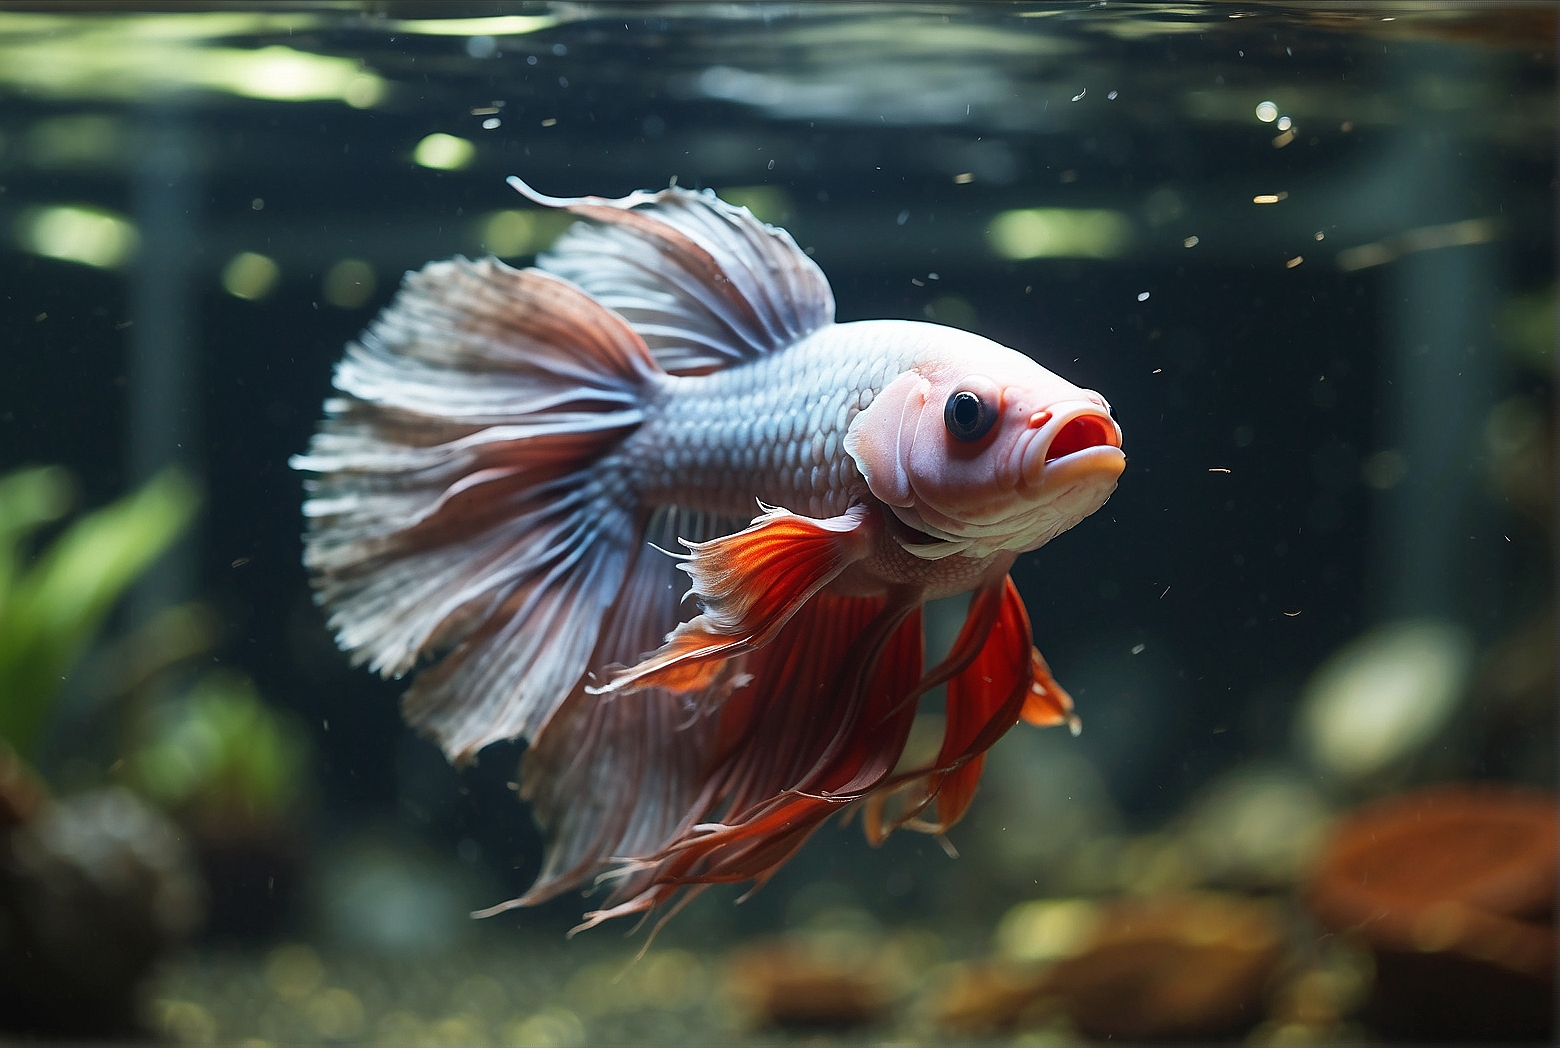 The Ultimate Guide: How to Care for a Betta Fish